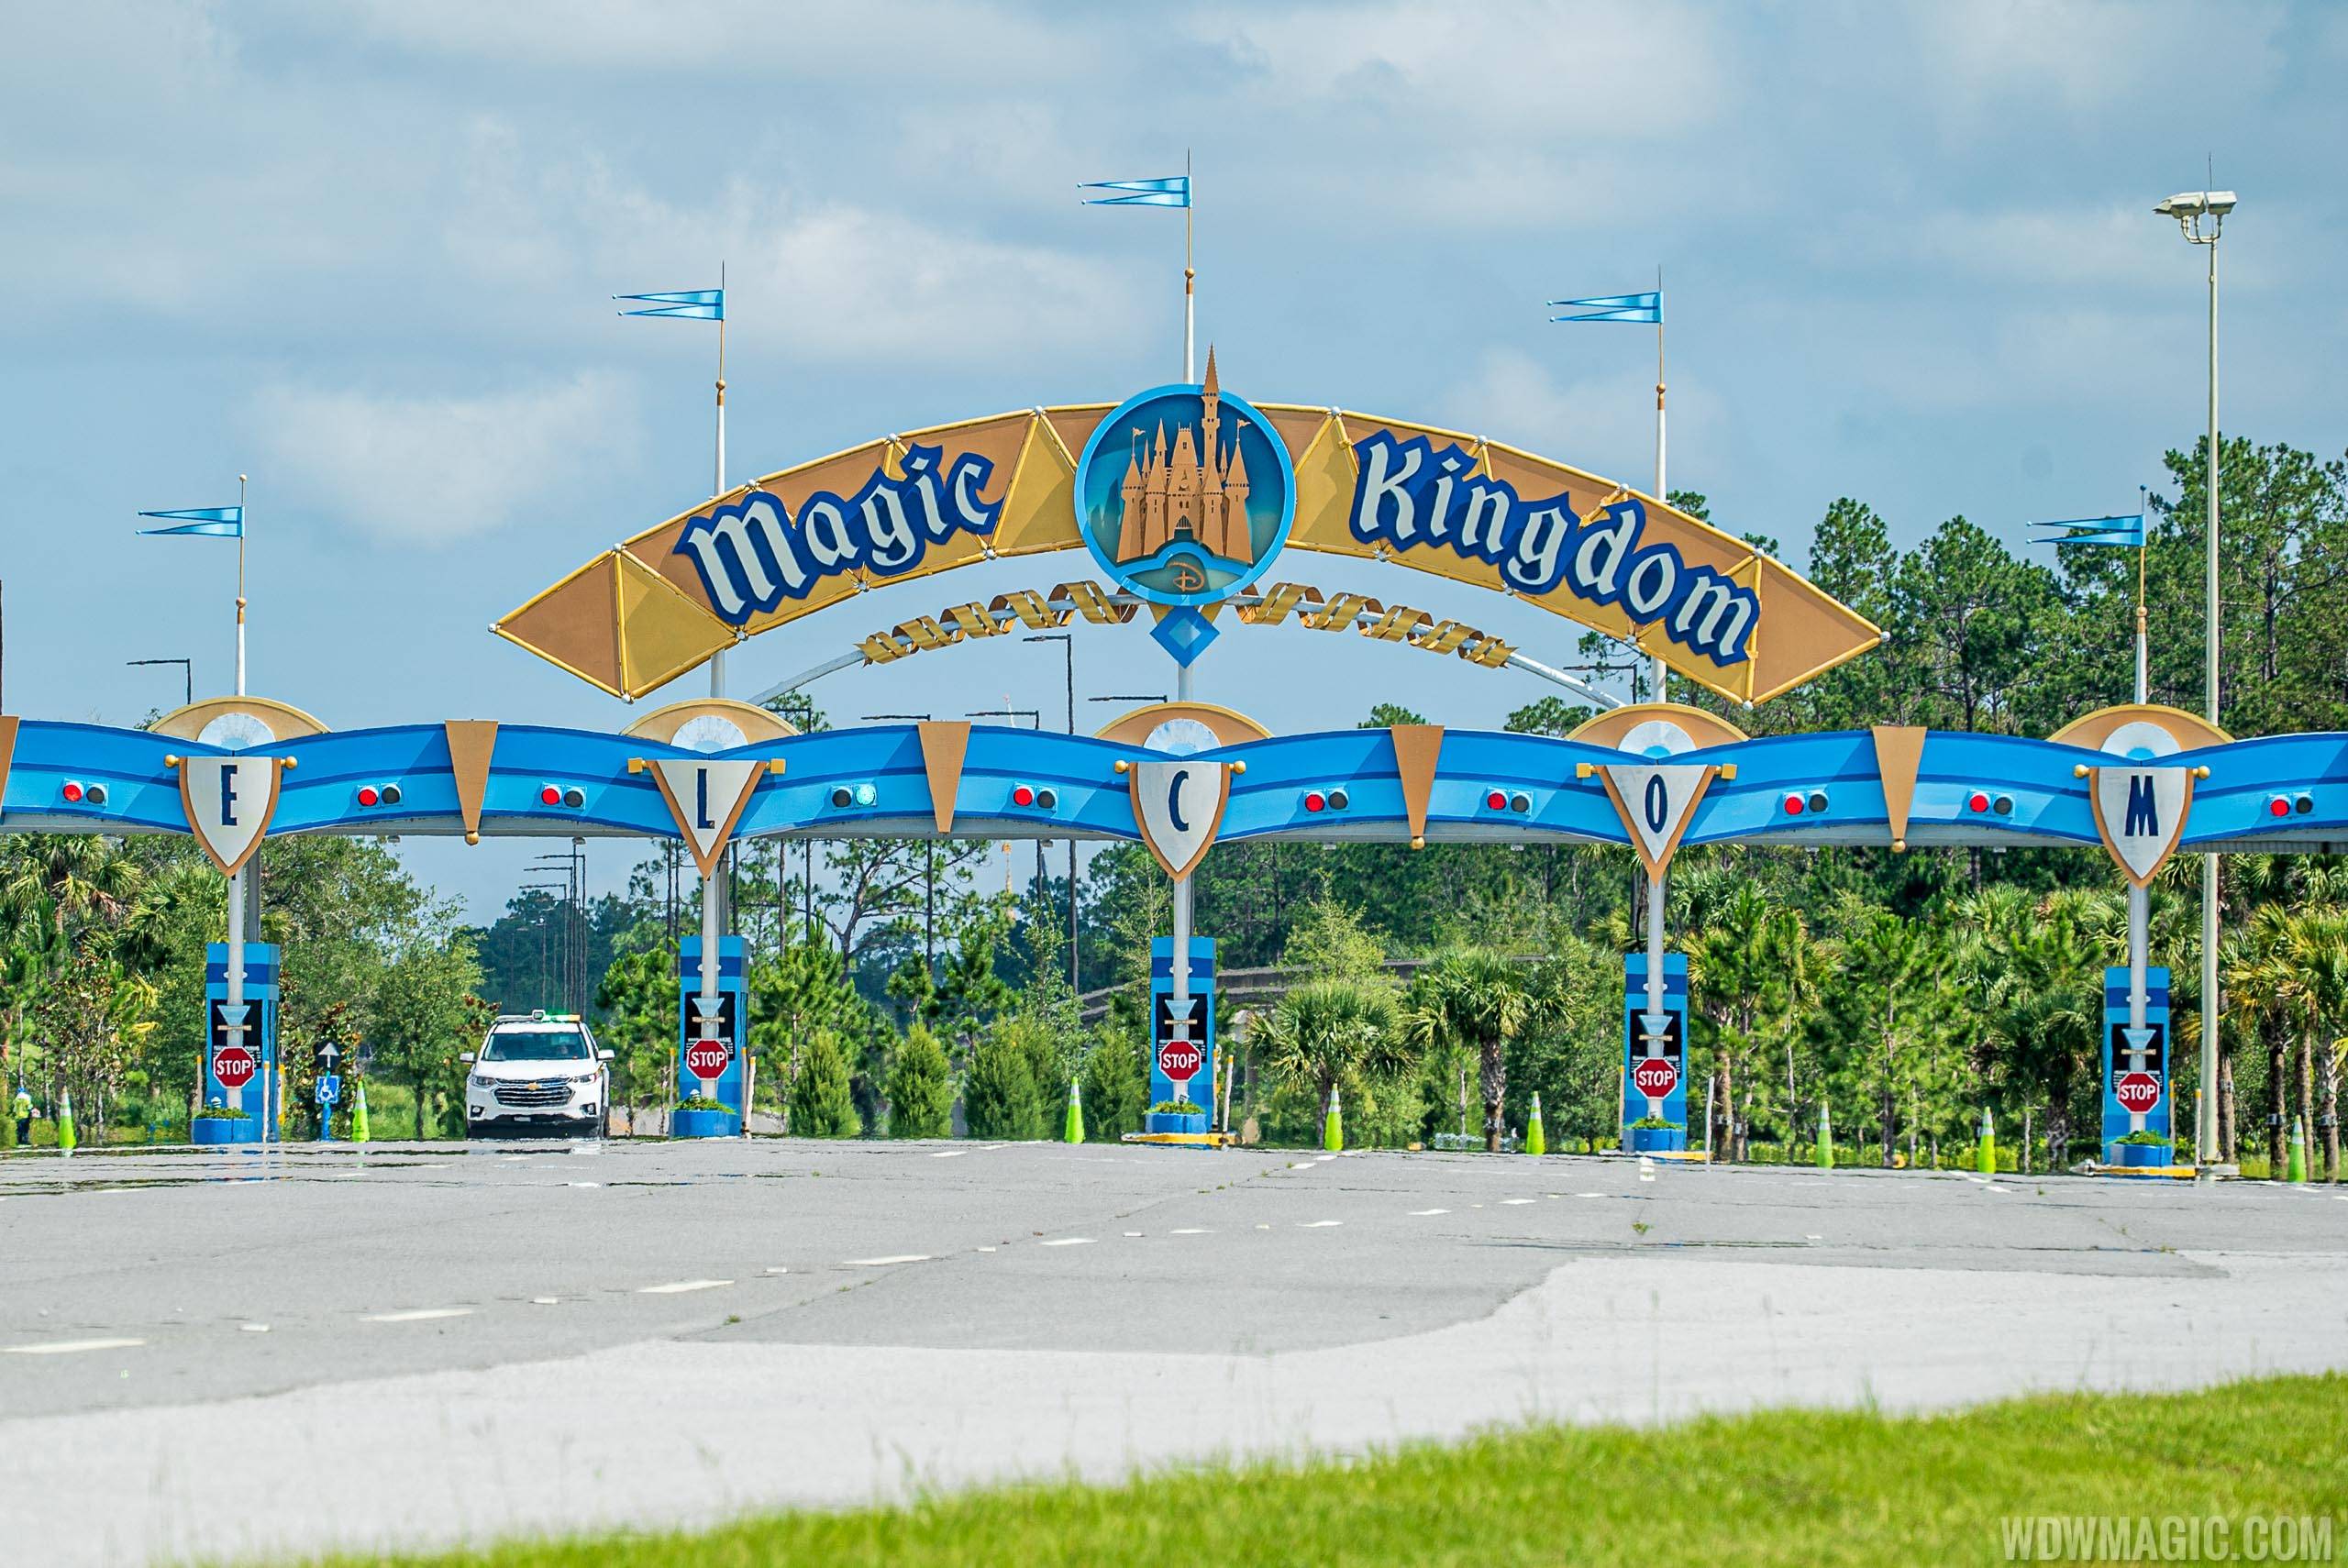 Walt Disney World has not seen international guests since the mid-March shutdown due to COVID-19